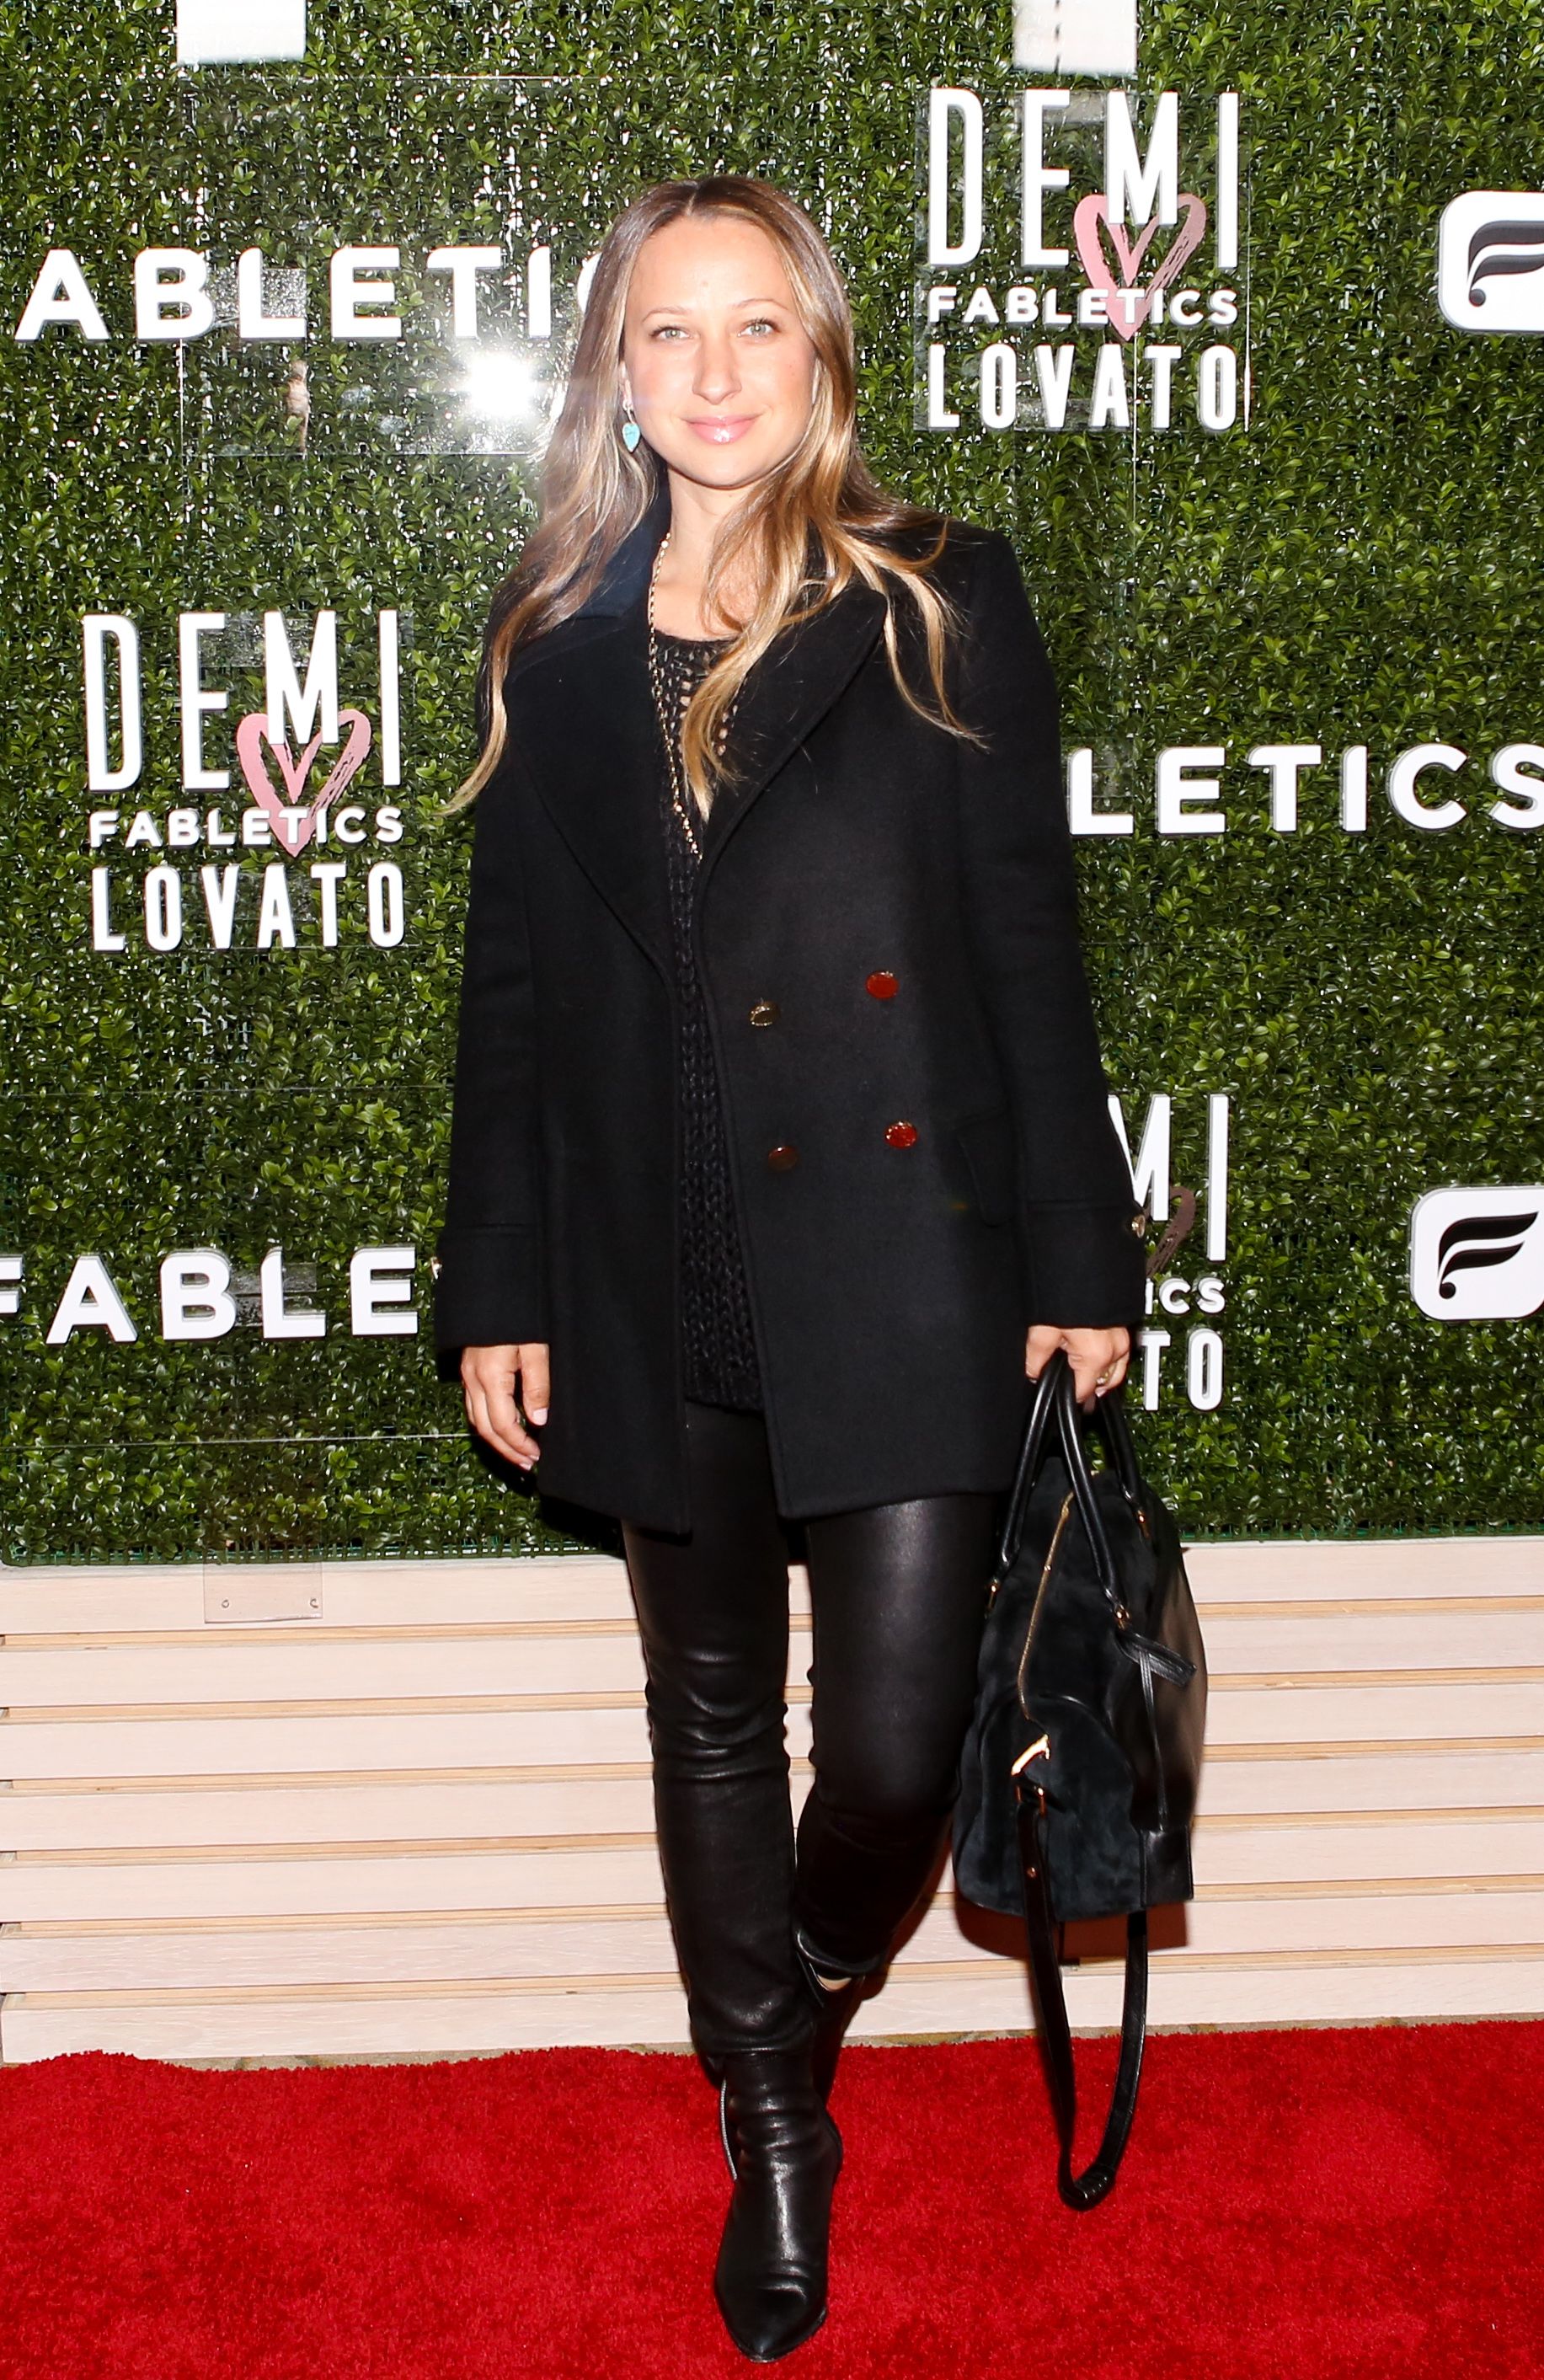 Jennifer Meyer attends The Demi Lovato for Fabletics launch party